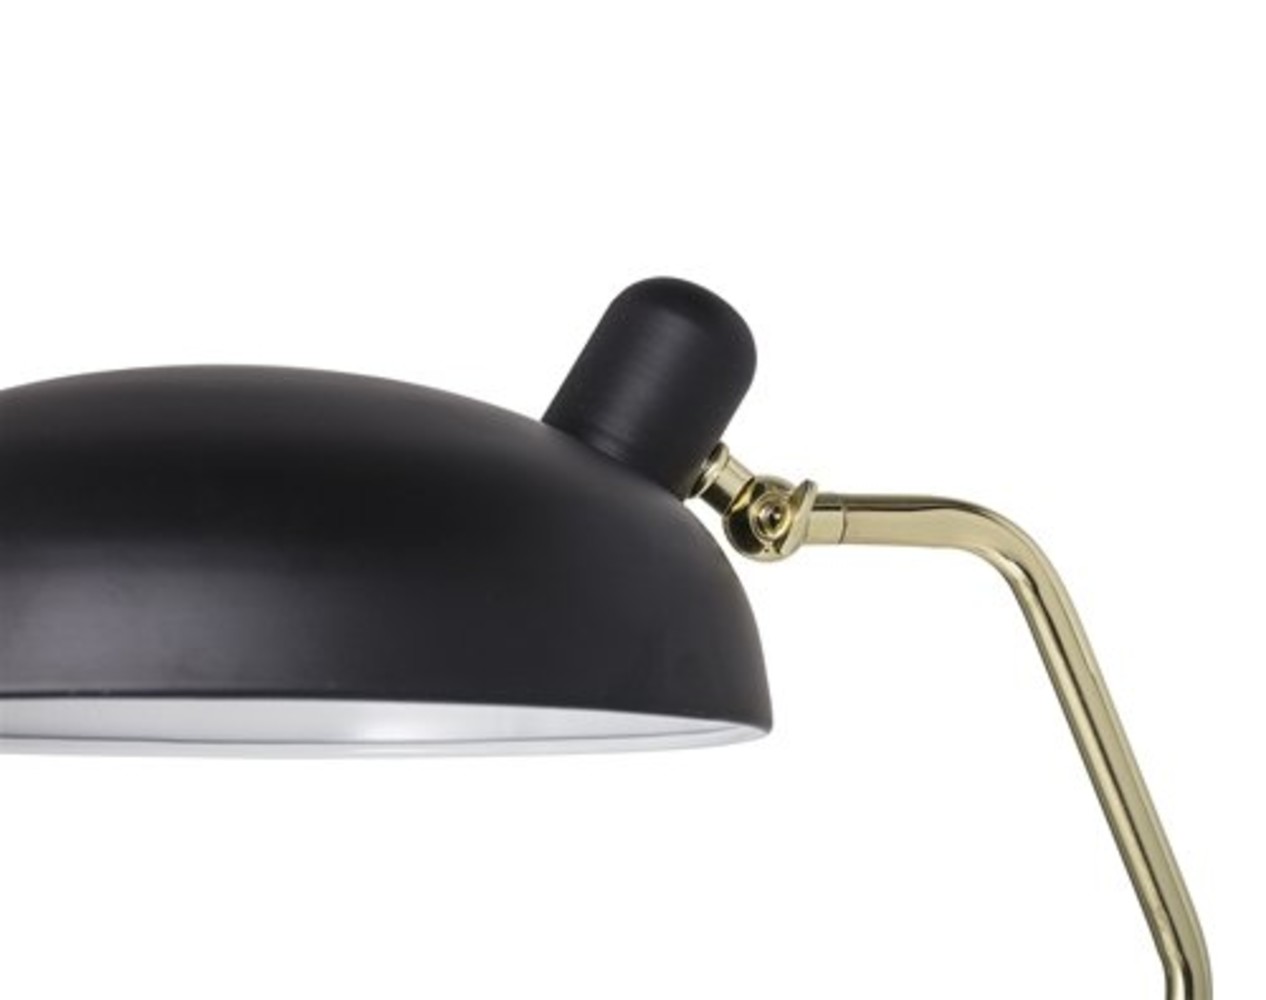 Lampe sur pied Collected Bloomingville